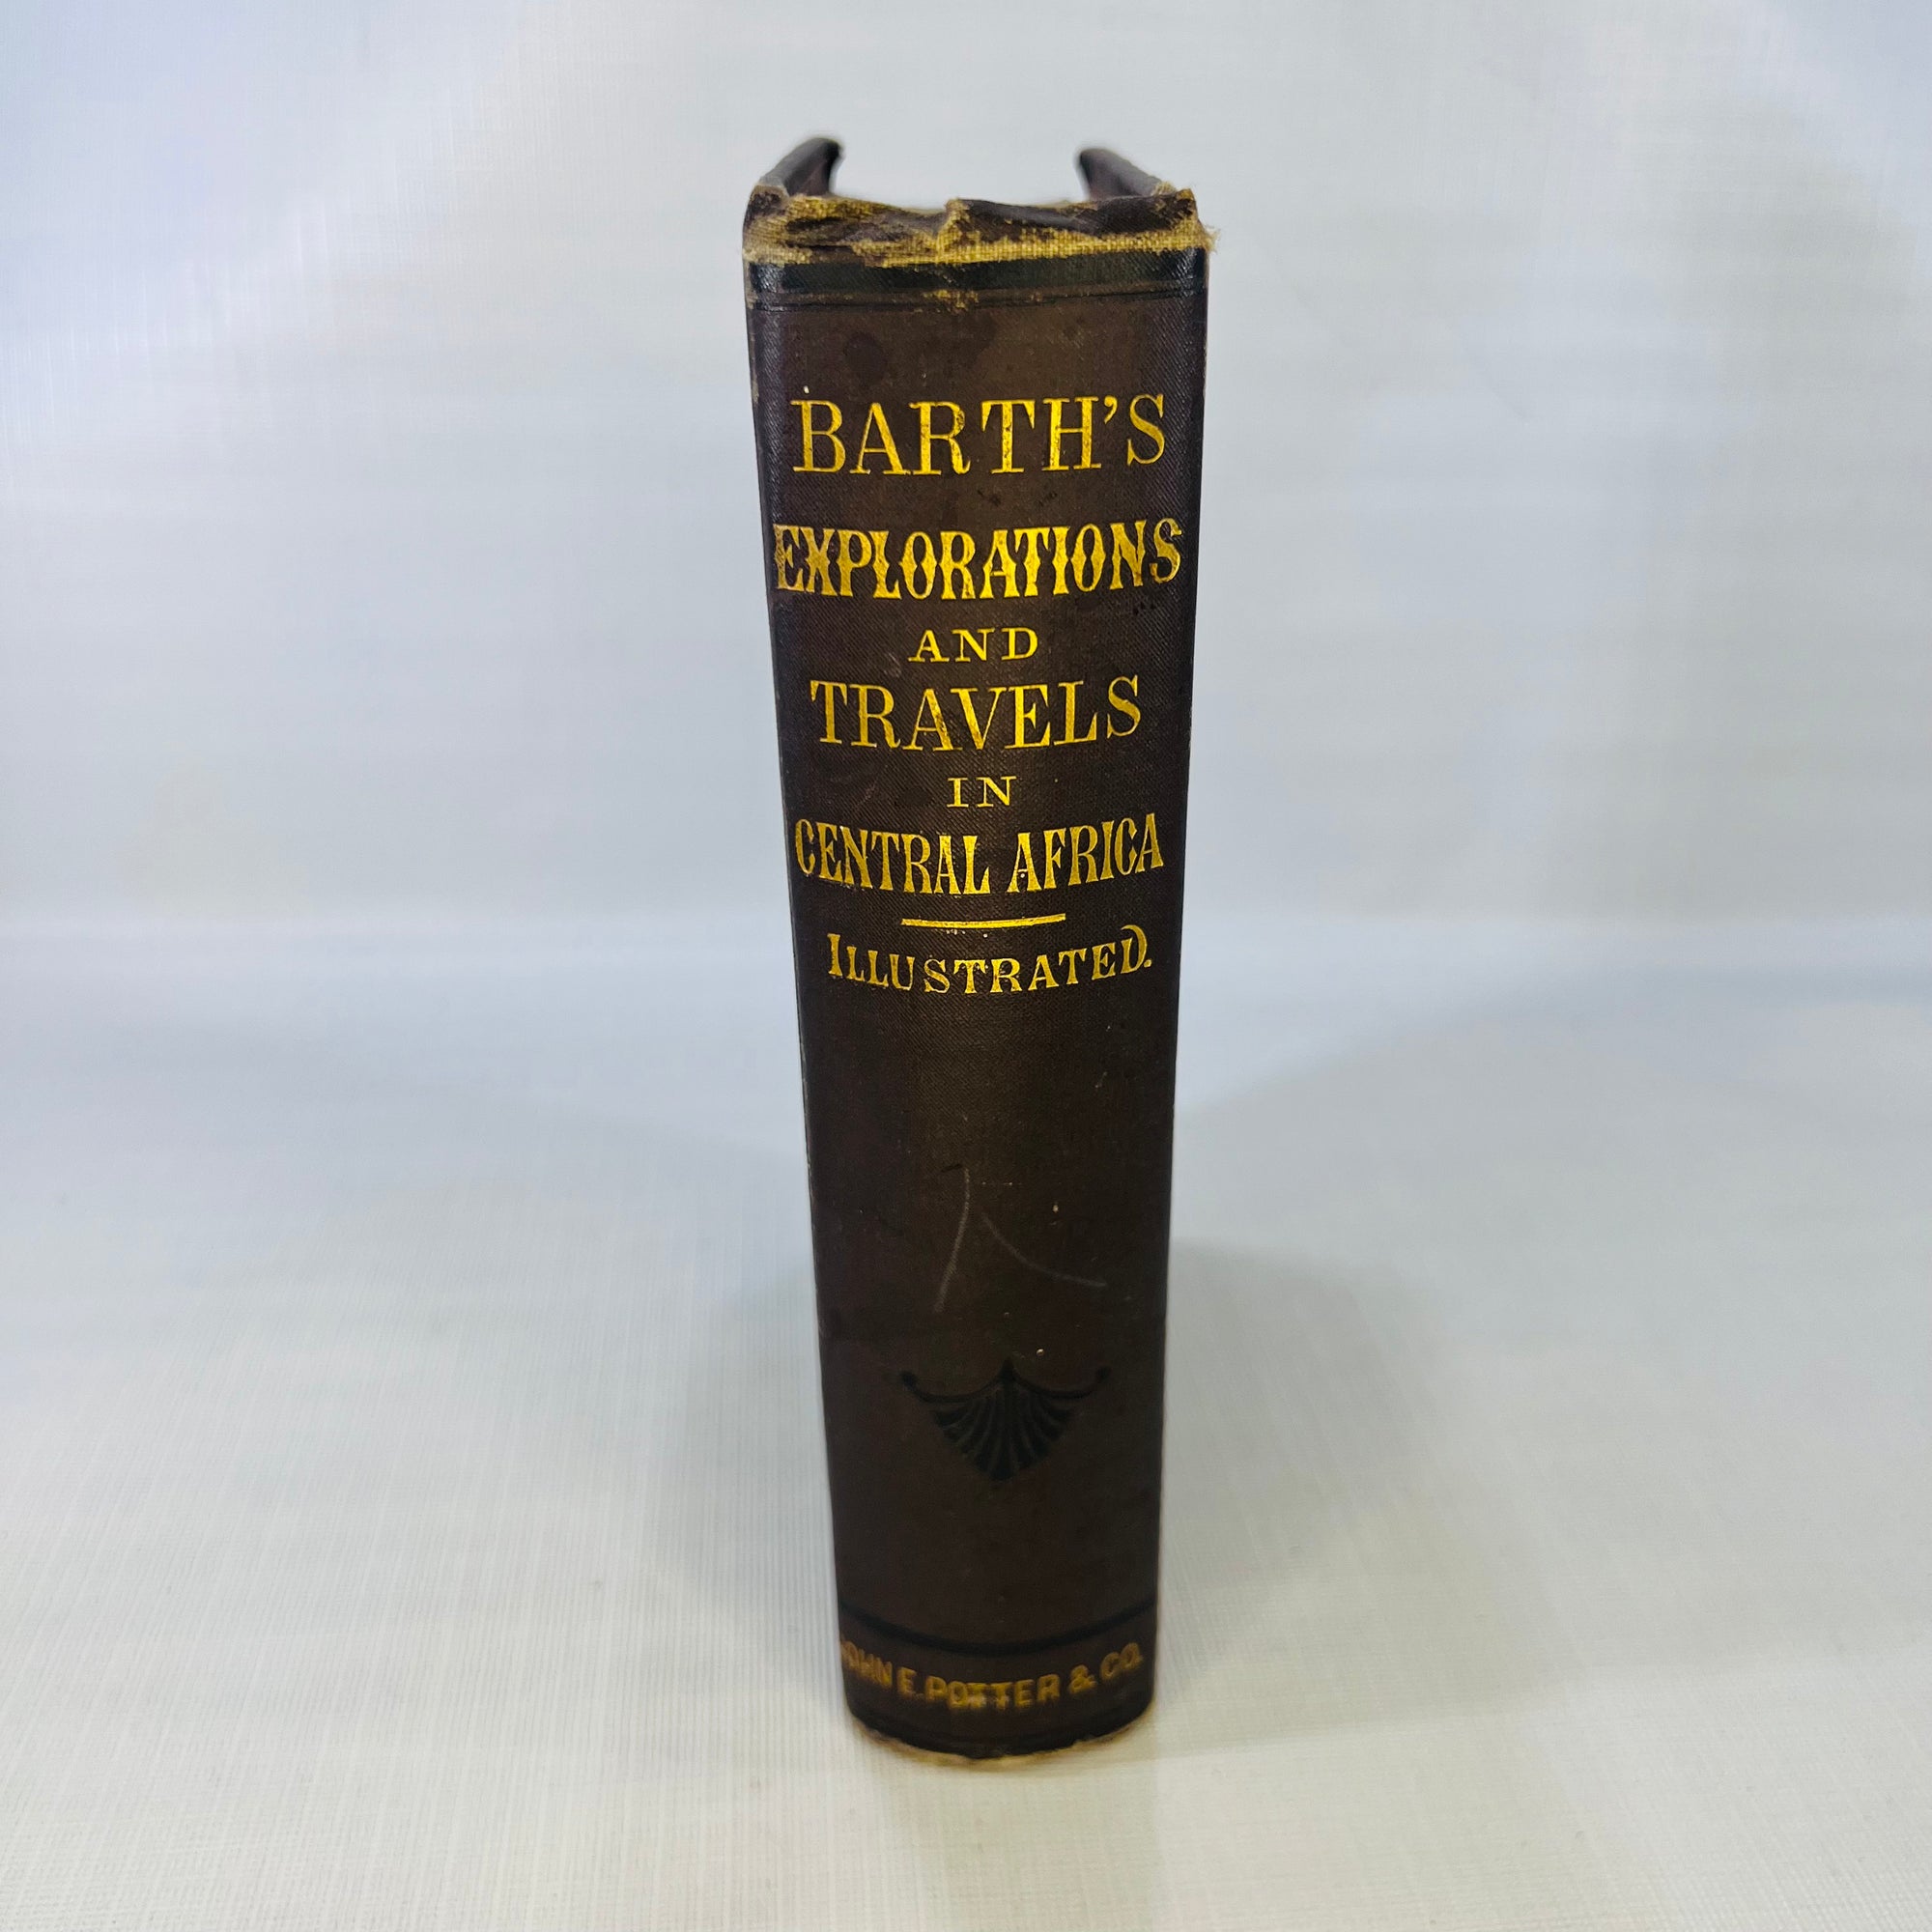 Travels and Discoveries in North and Central Africa from the Journal of an Expedition by Henry Barth Circa 1885 John E. Potter and Company